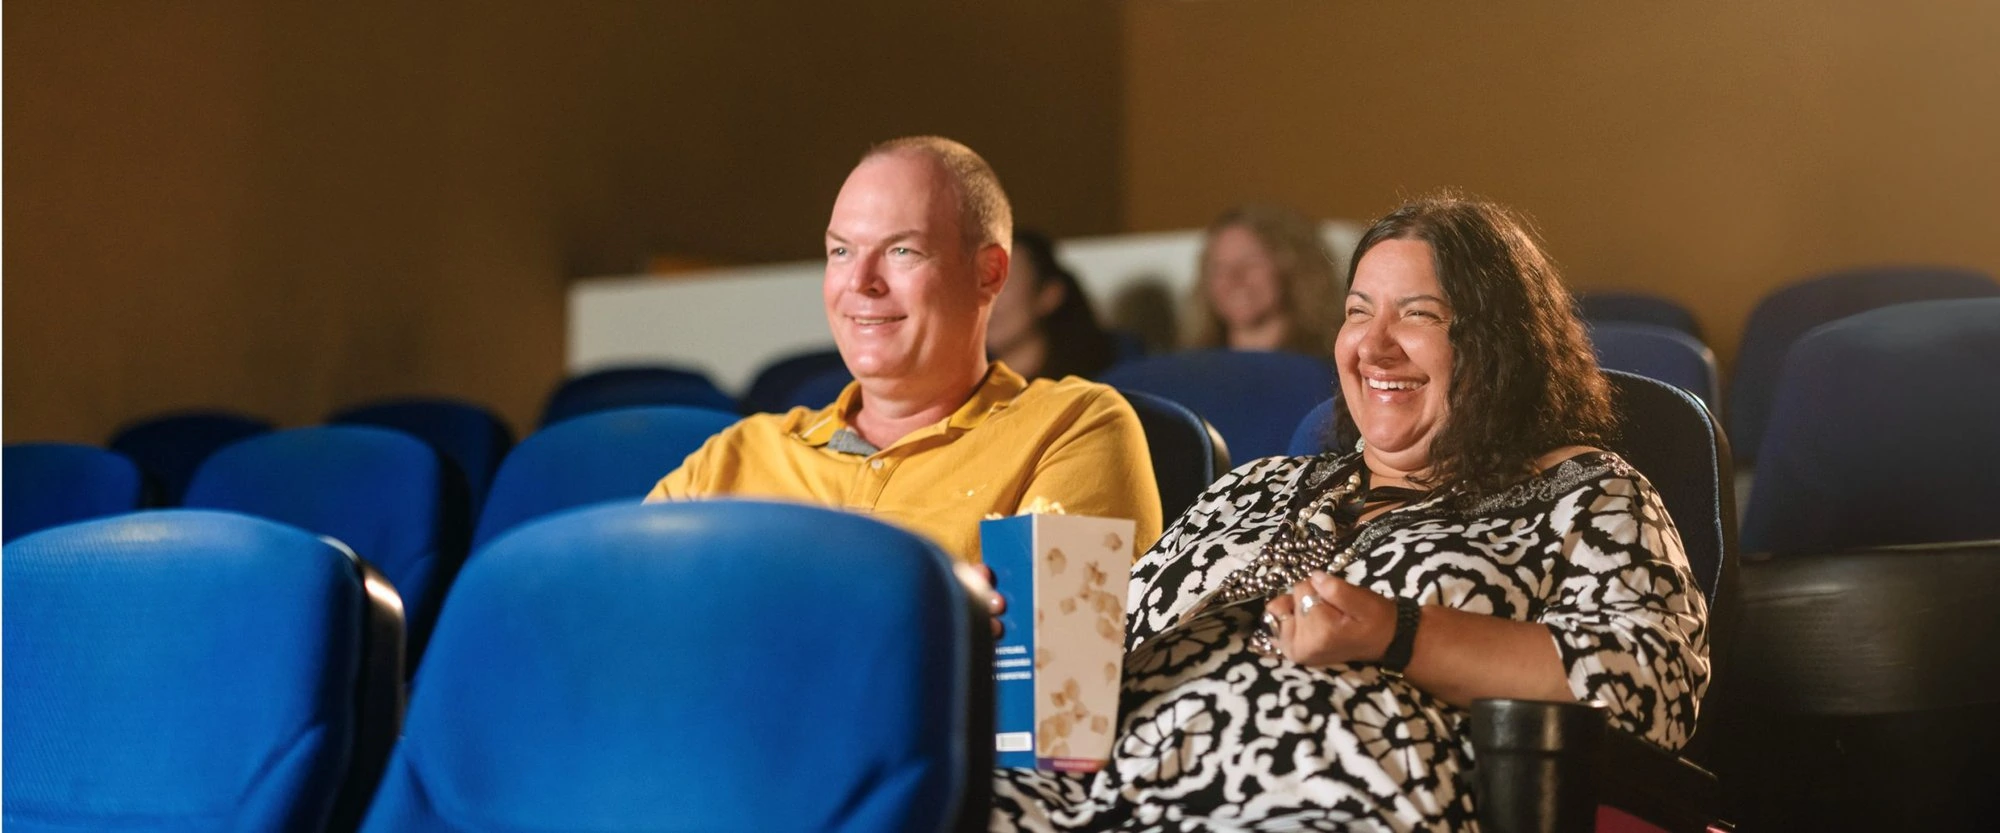 A man and woman sitting in a movie theater - NDIS Community Support